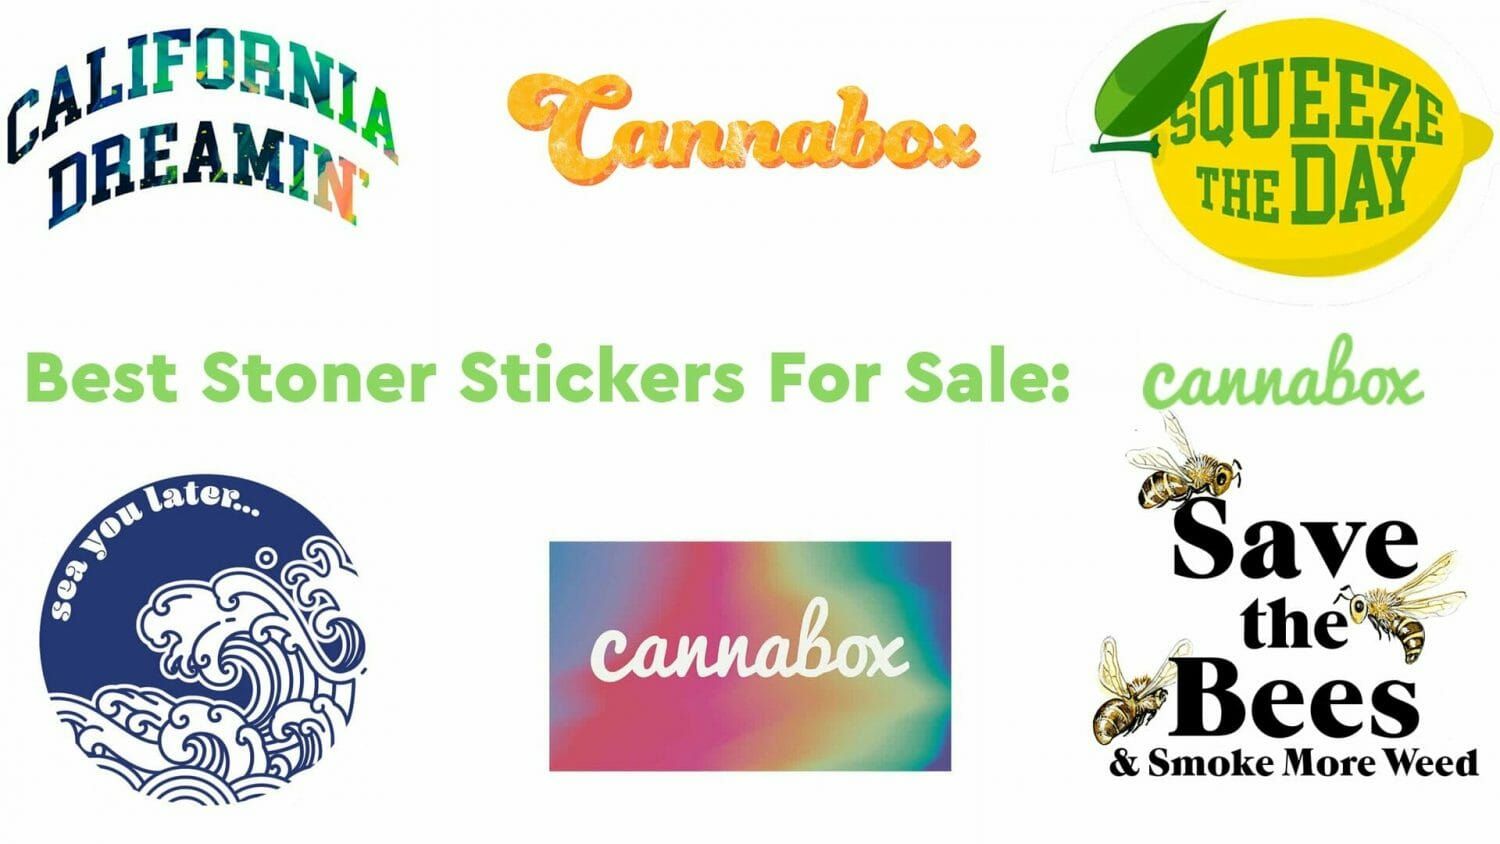 Best 420 Stoner Stickers For Sale